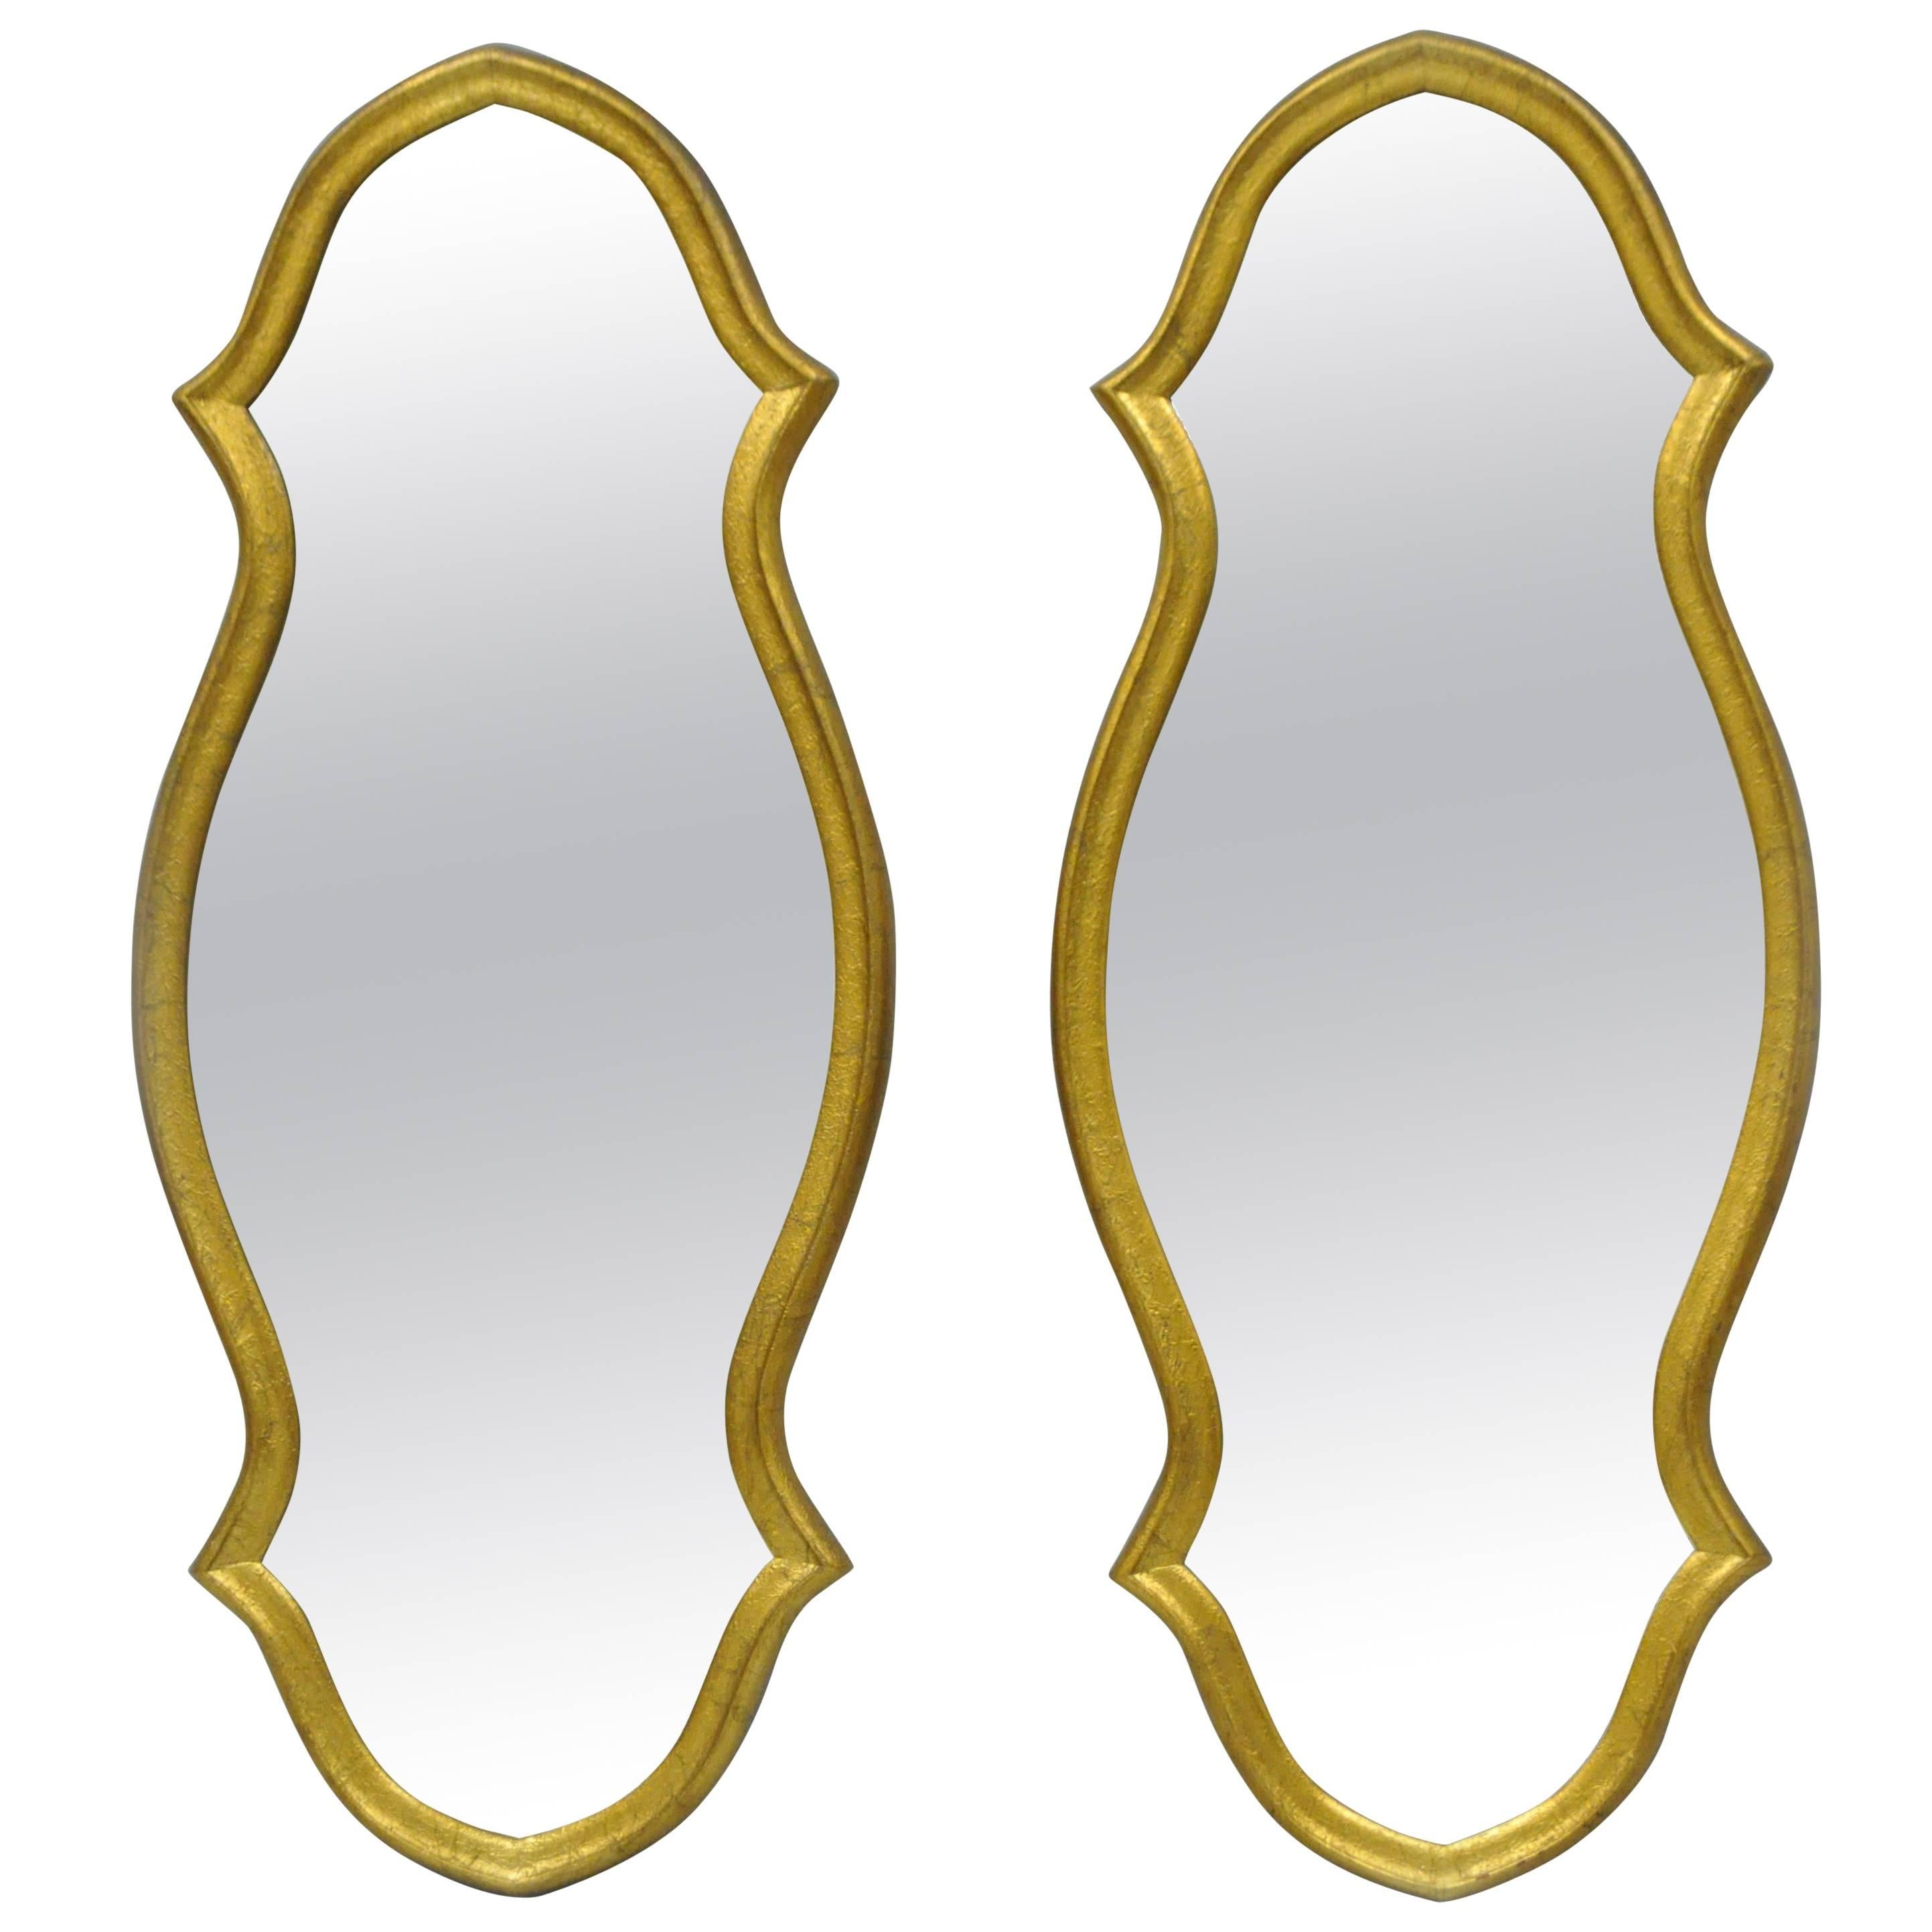 Pair of Vintage Carved Wood Hollywood Regency Gold Keyhole Frame Wall Mirrors